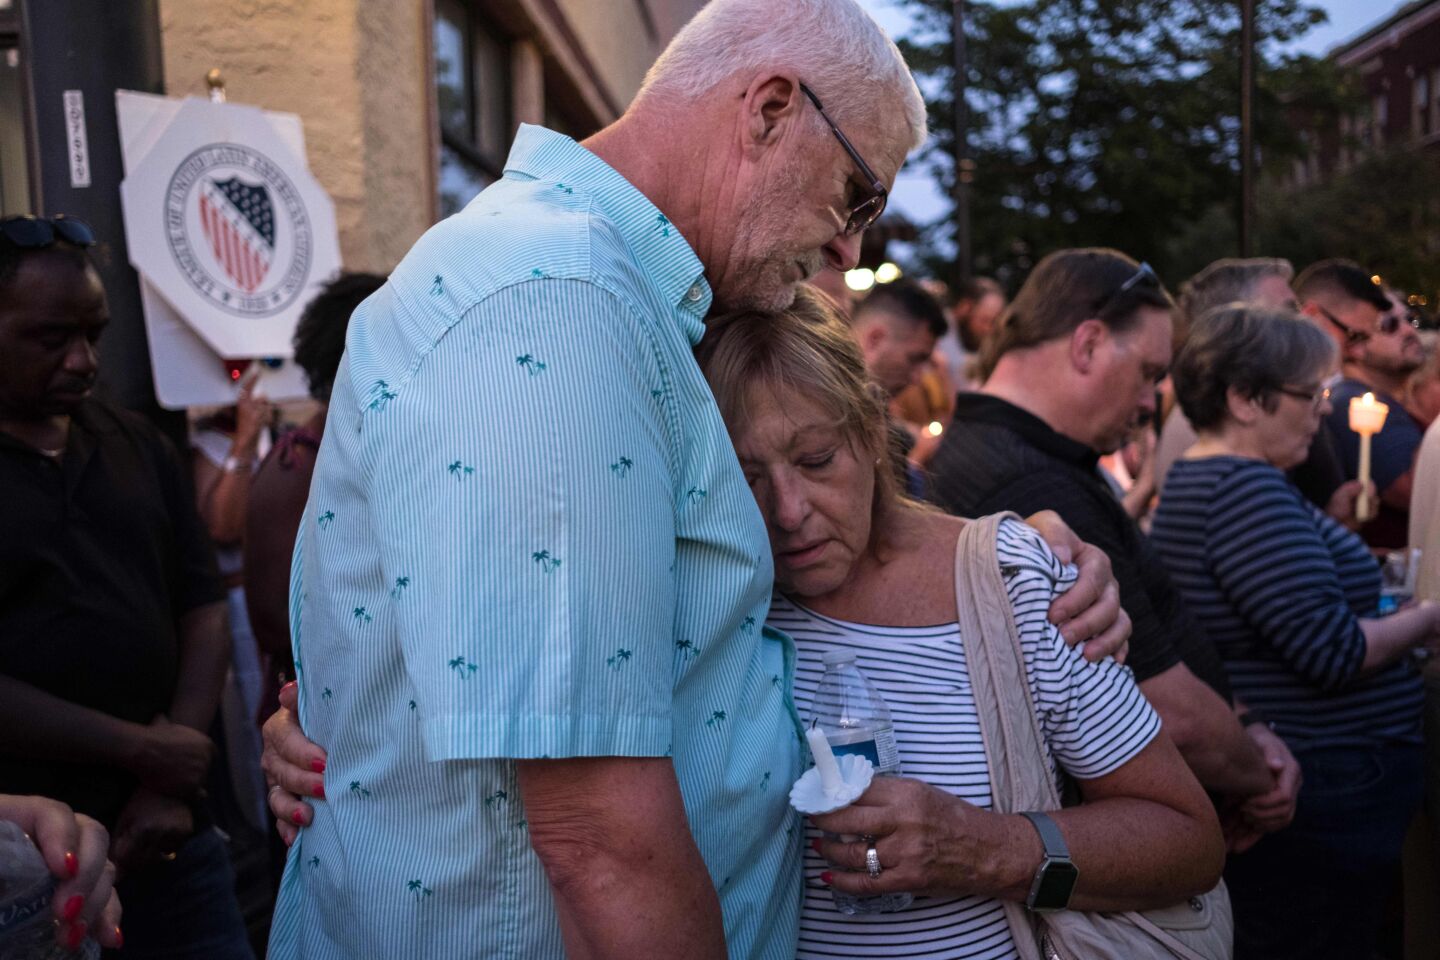 People comfort each other as they take part of a candle lit vigil for shooting victims in Dayton, Ohio.